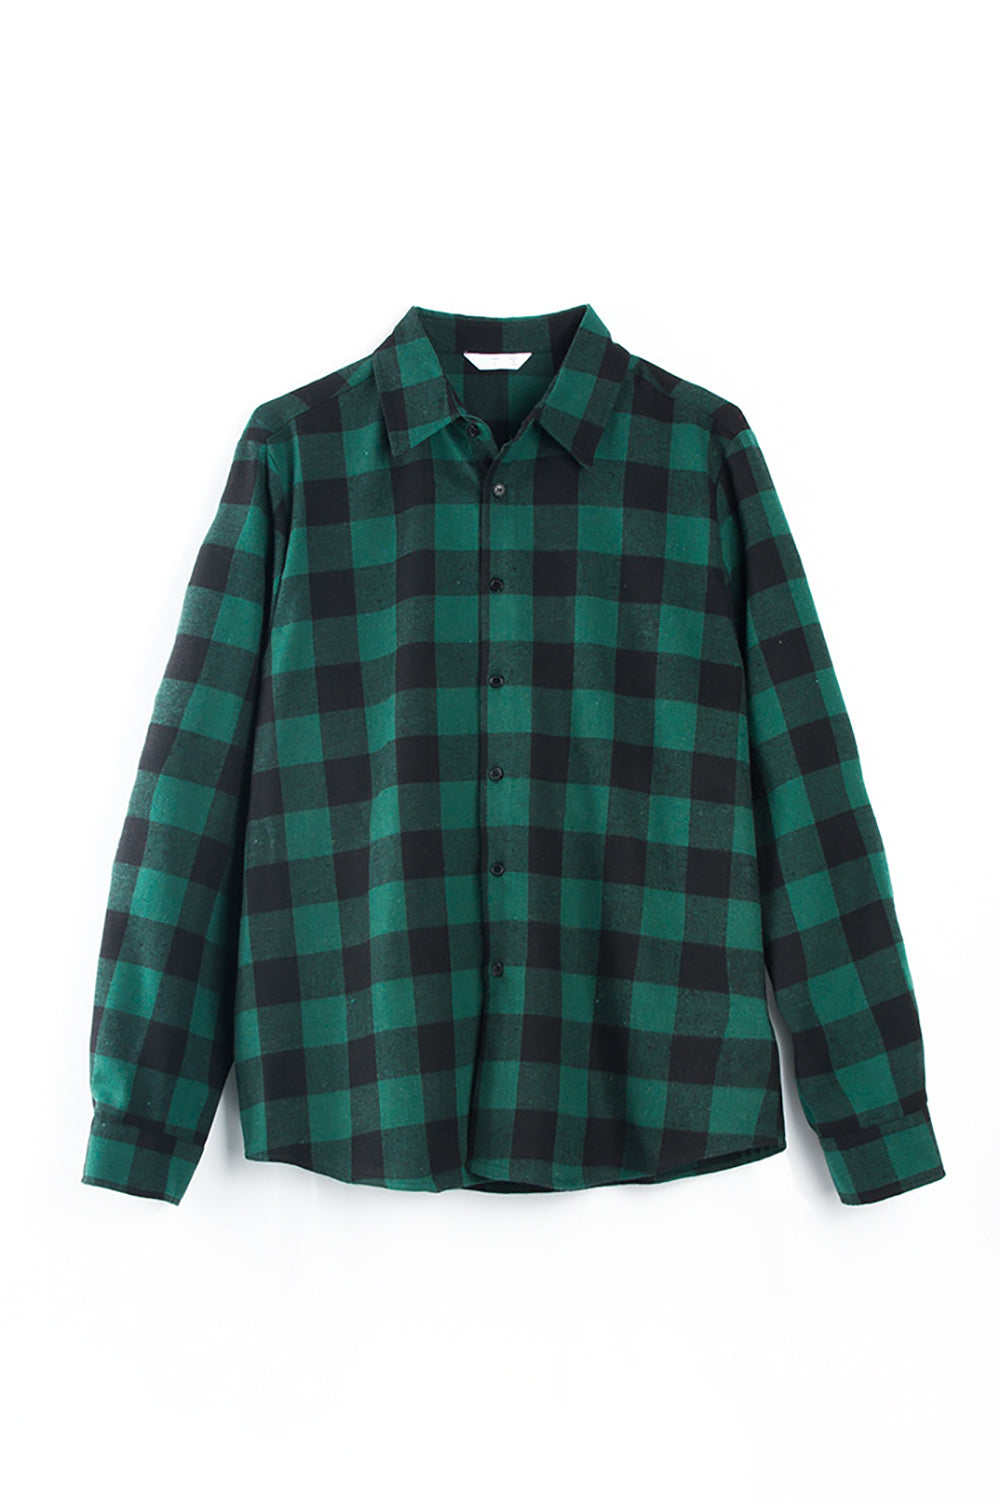 Family Matching Outfits Dark Green Plaid Bowknot Dresses and Long Sleeves T-Shirt